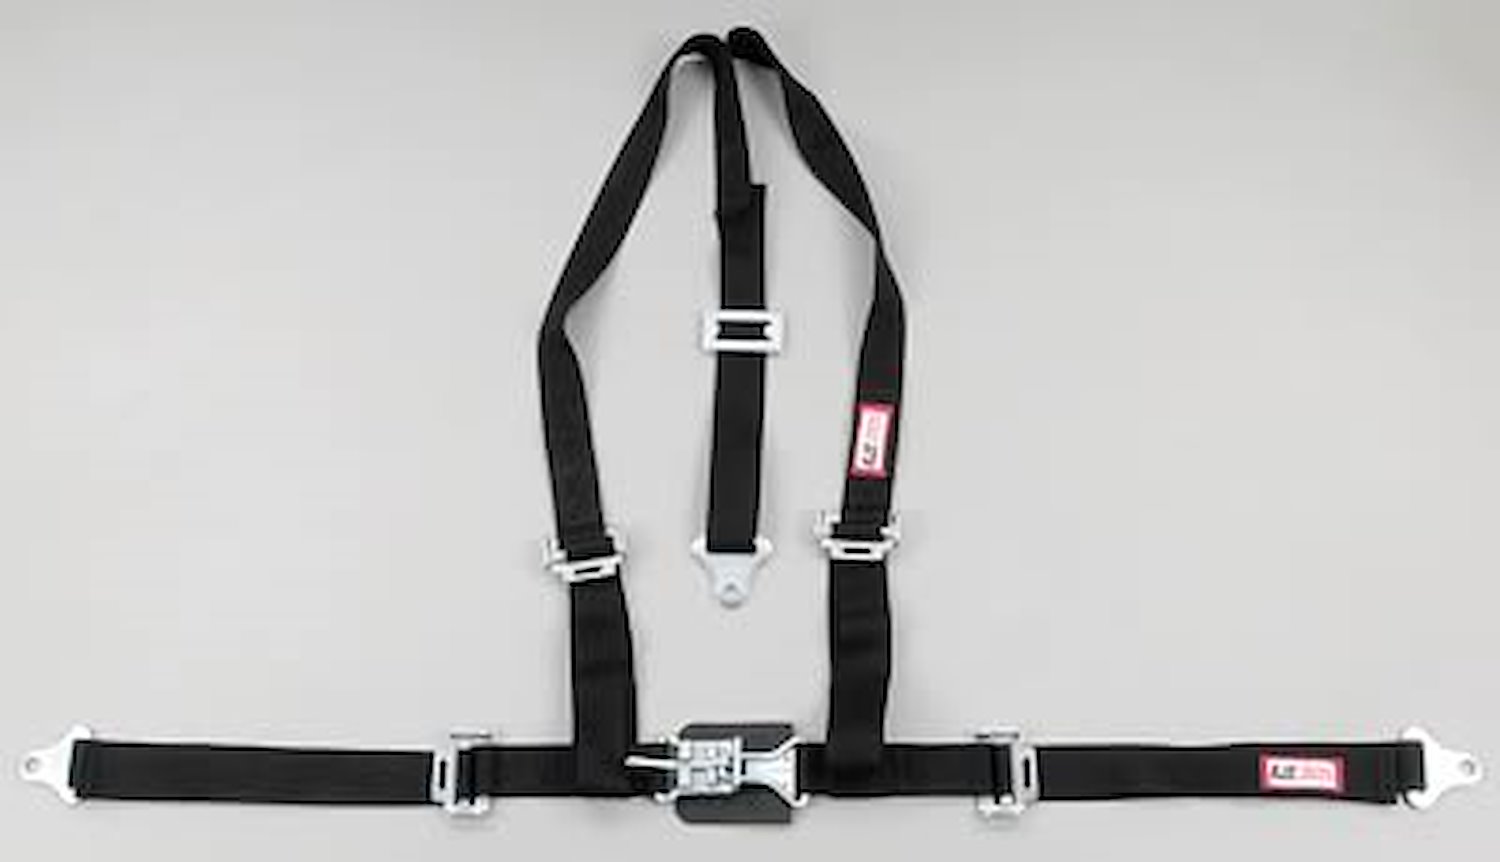 NON-SFI L&L HARNESS 3 PULL DOWN Lap Belt w/adjuster 2 S.H. V ROLL BAR Mount ALL SNAP ENDS RED